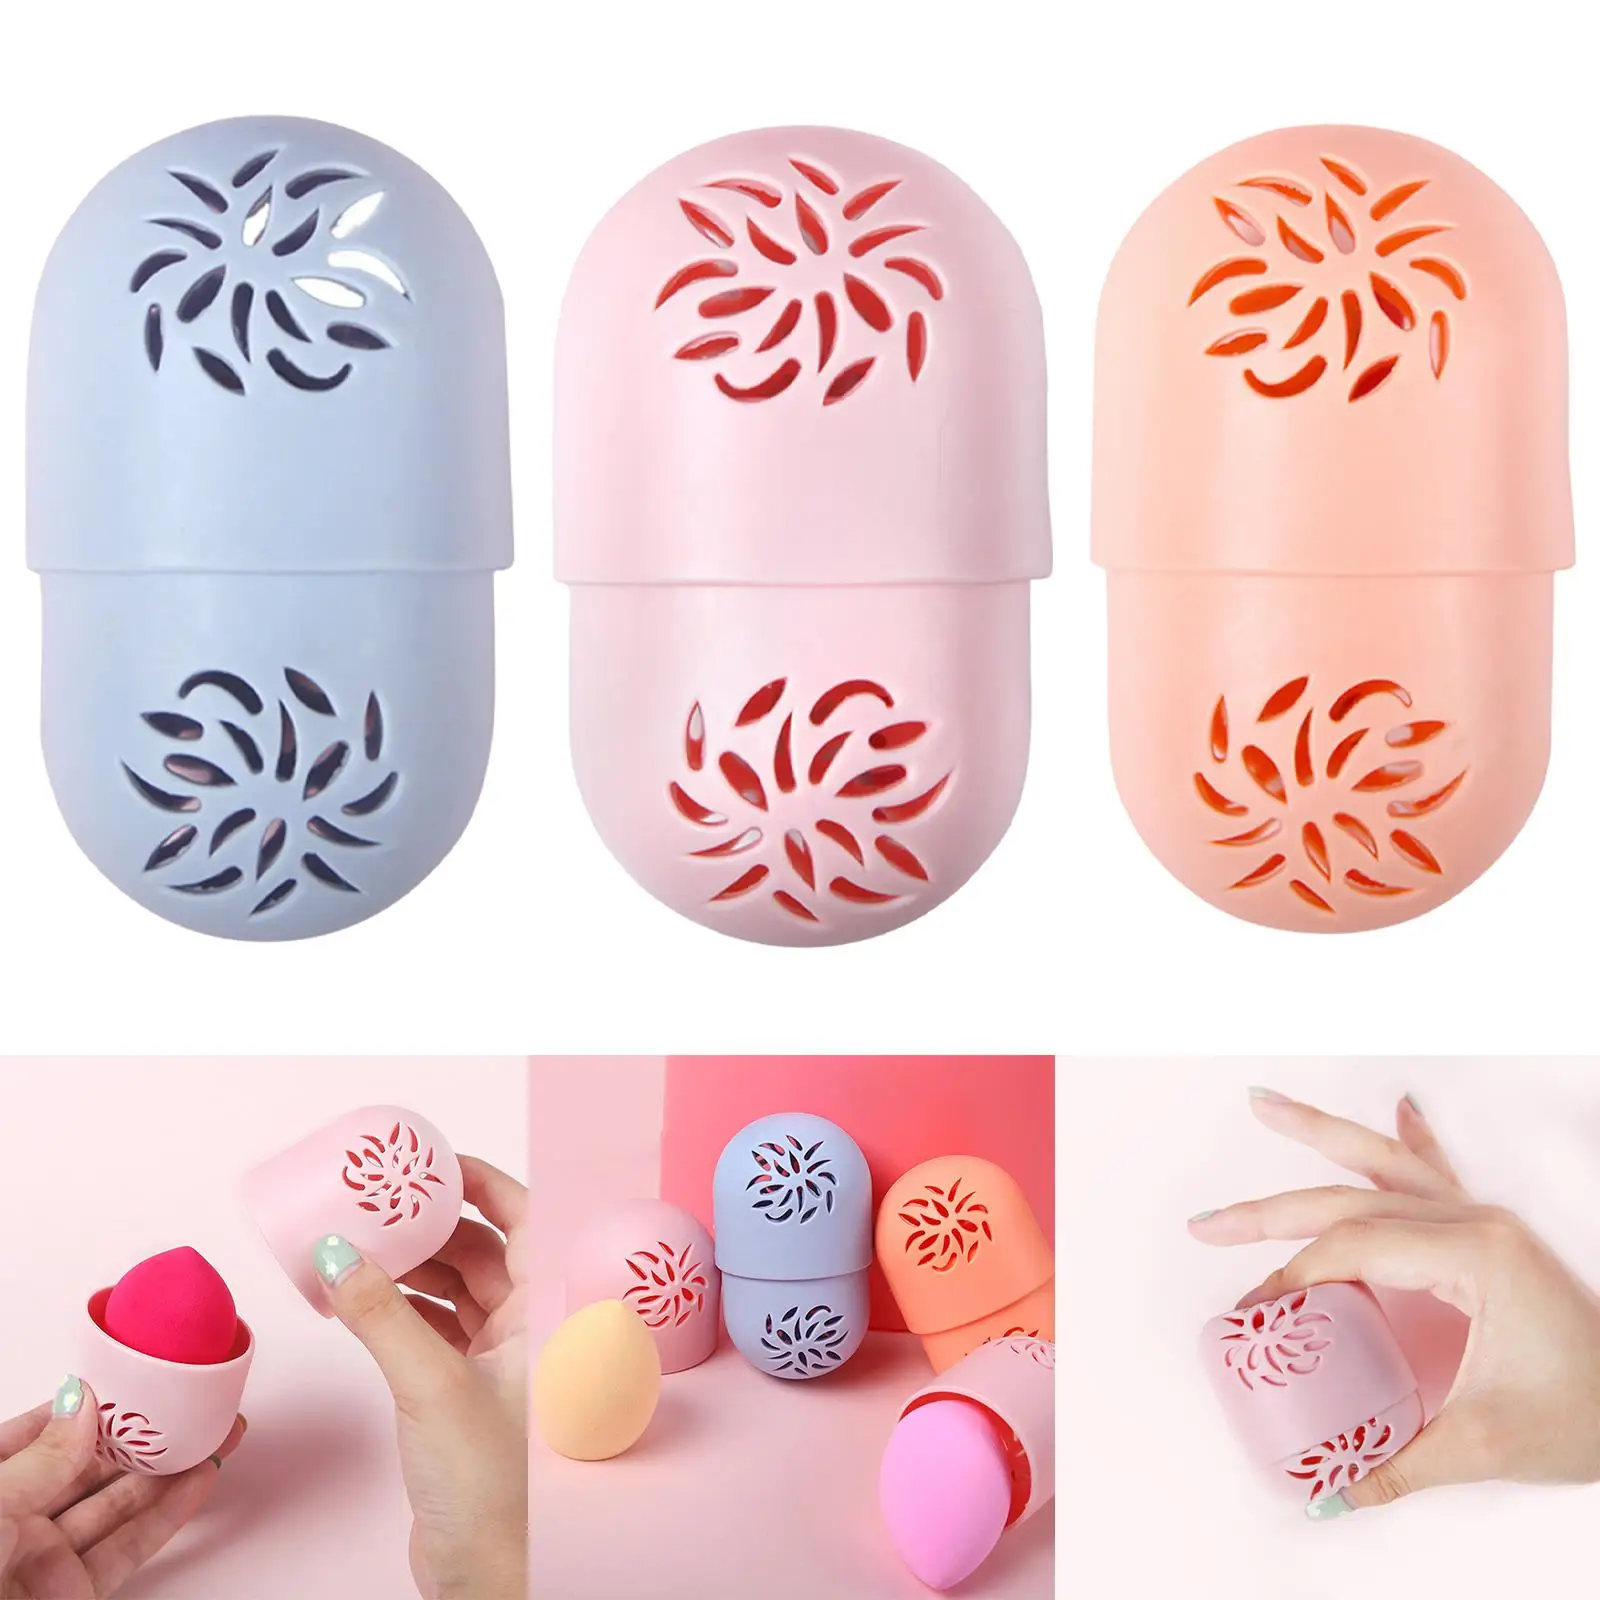 Silicone Beauty Sponge Storage Box Cosmetic Puff Case Portable Makeup Sponge Storage for Travel Container Egg Sponge Stand